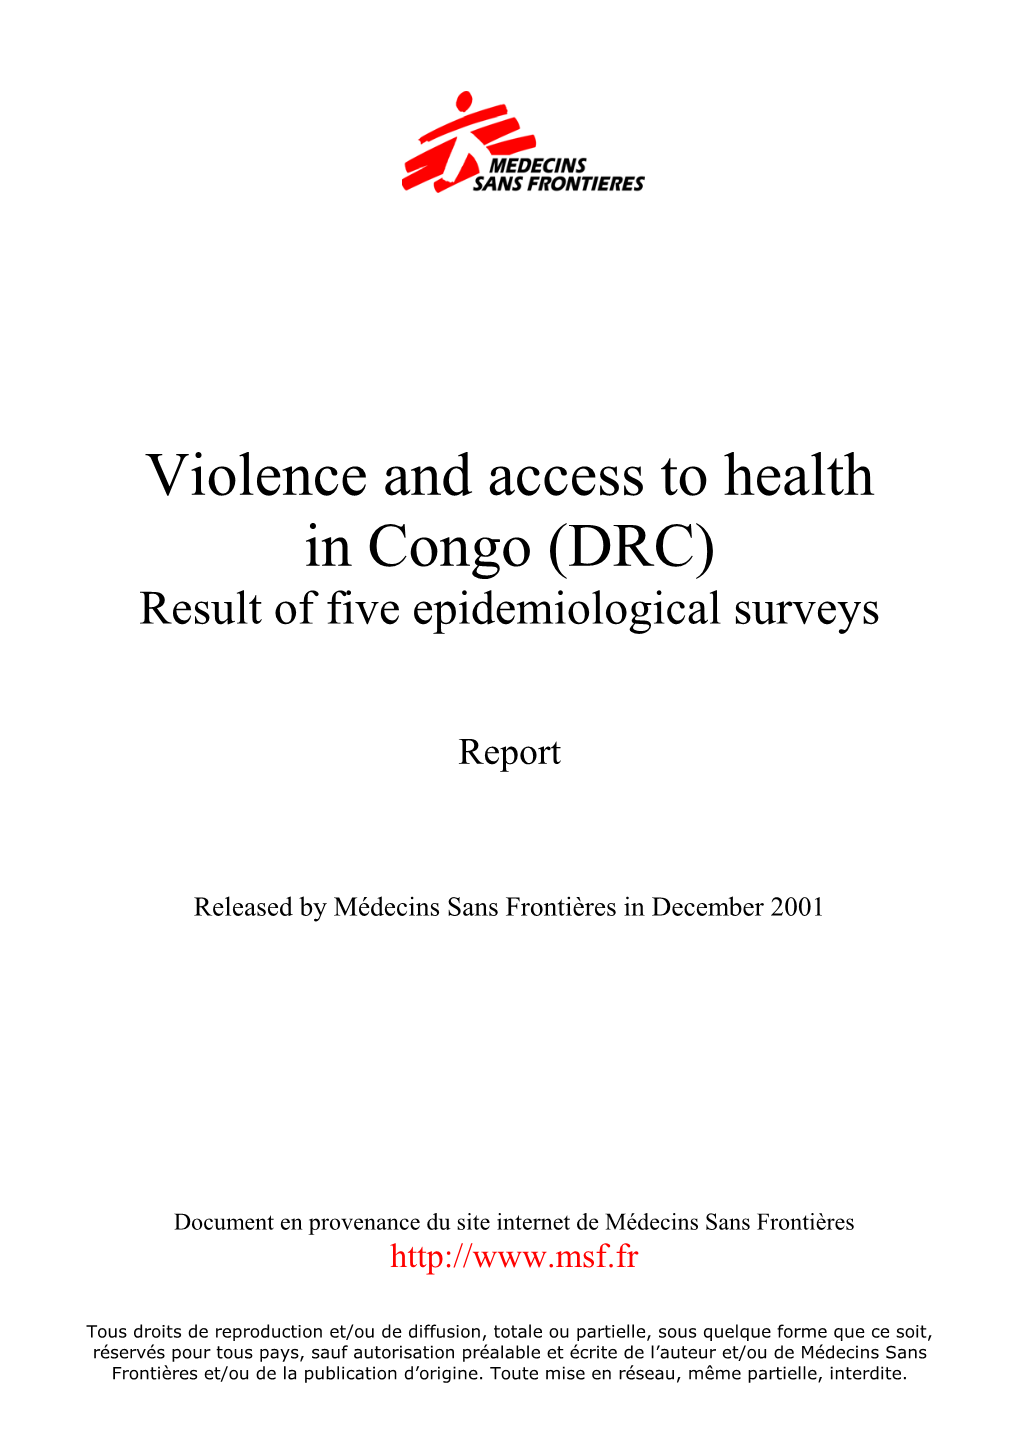 Violence and Access to Health in Congo (DRC) Result of Five Epidemiological Surveys